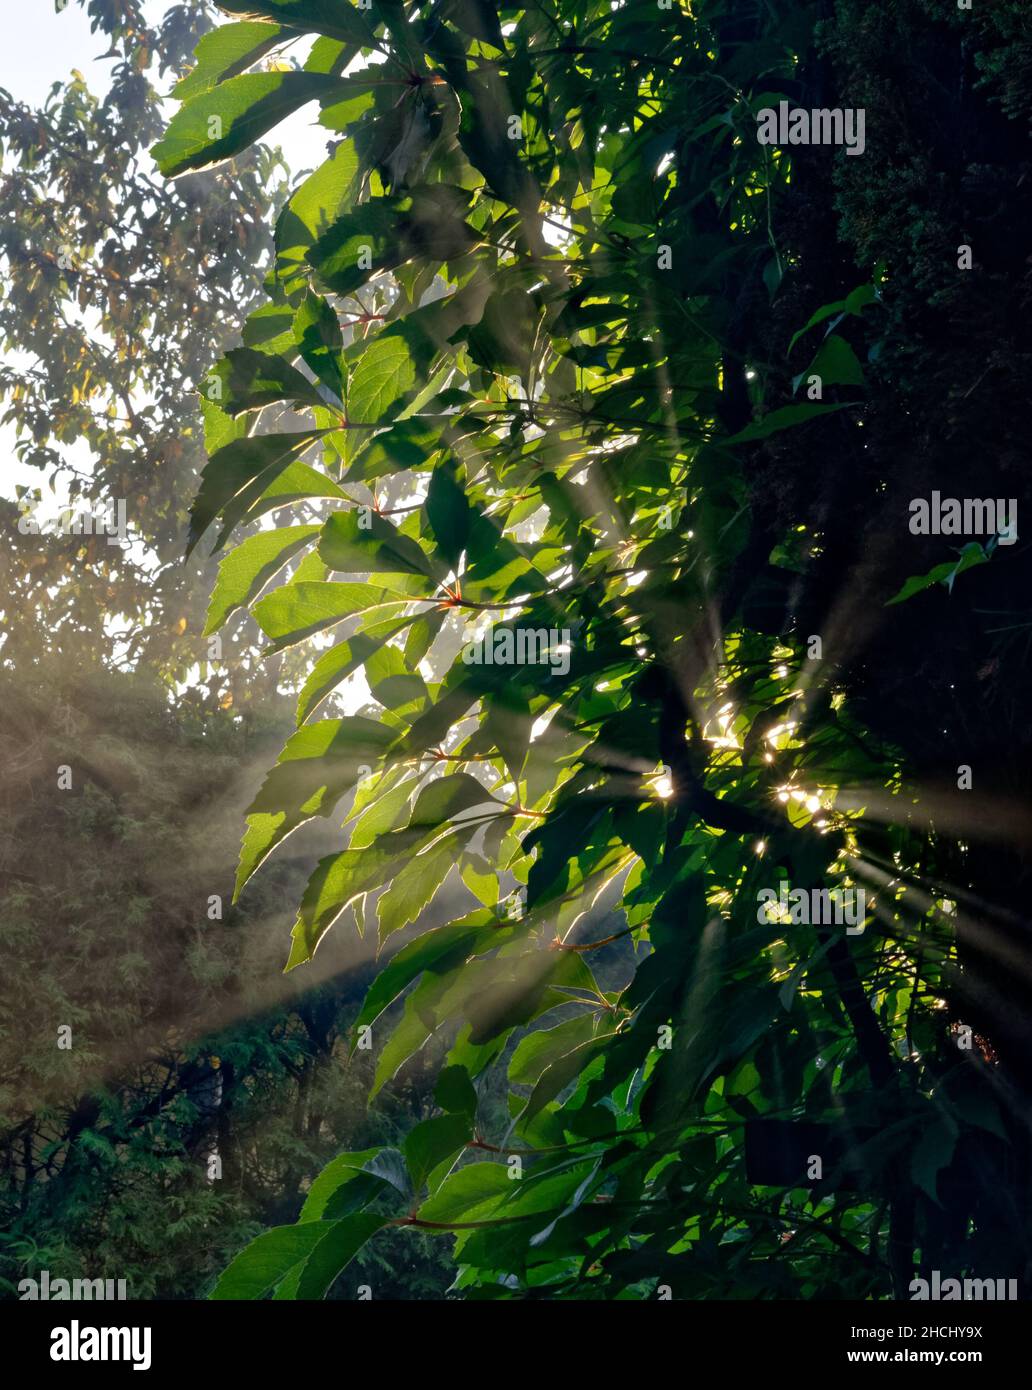 Closeup of a light reflection coming from behind the jungle leaves of a tree foliage Stock Photo